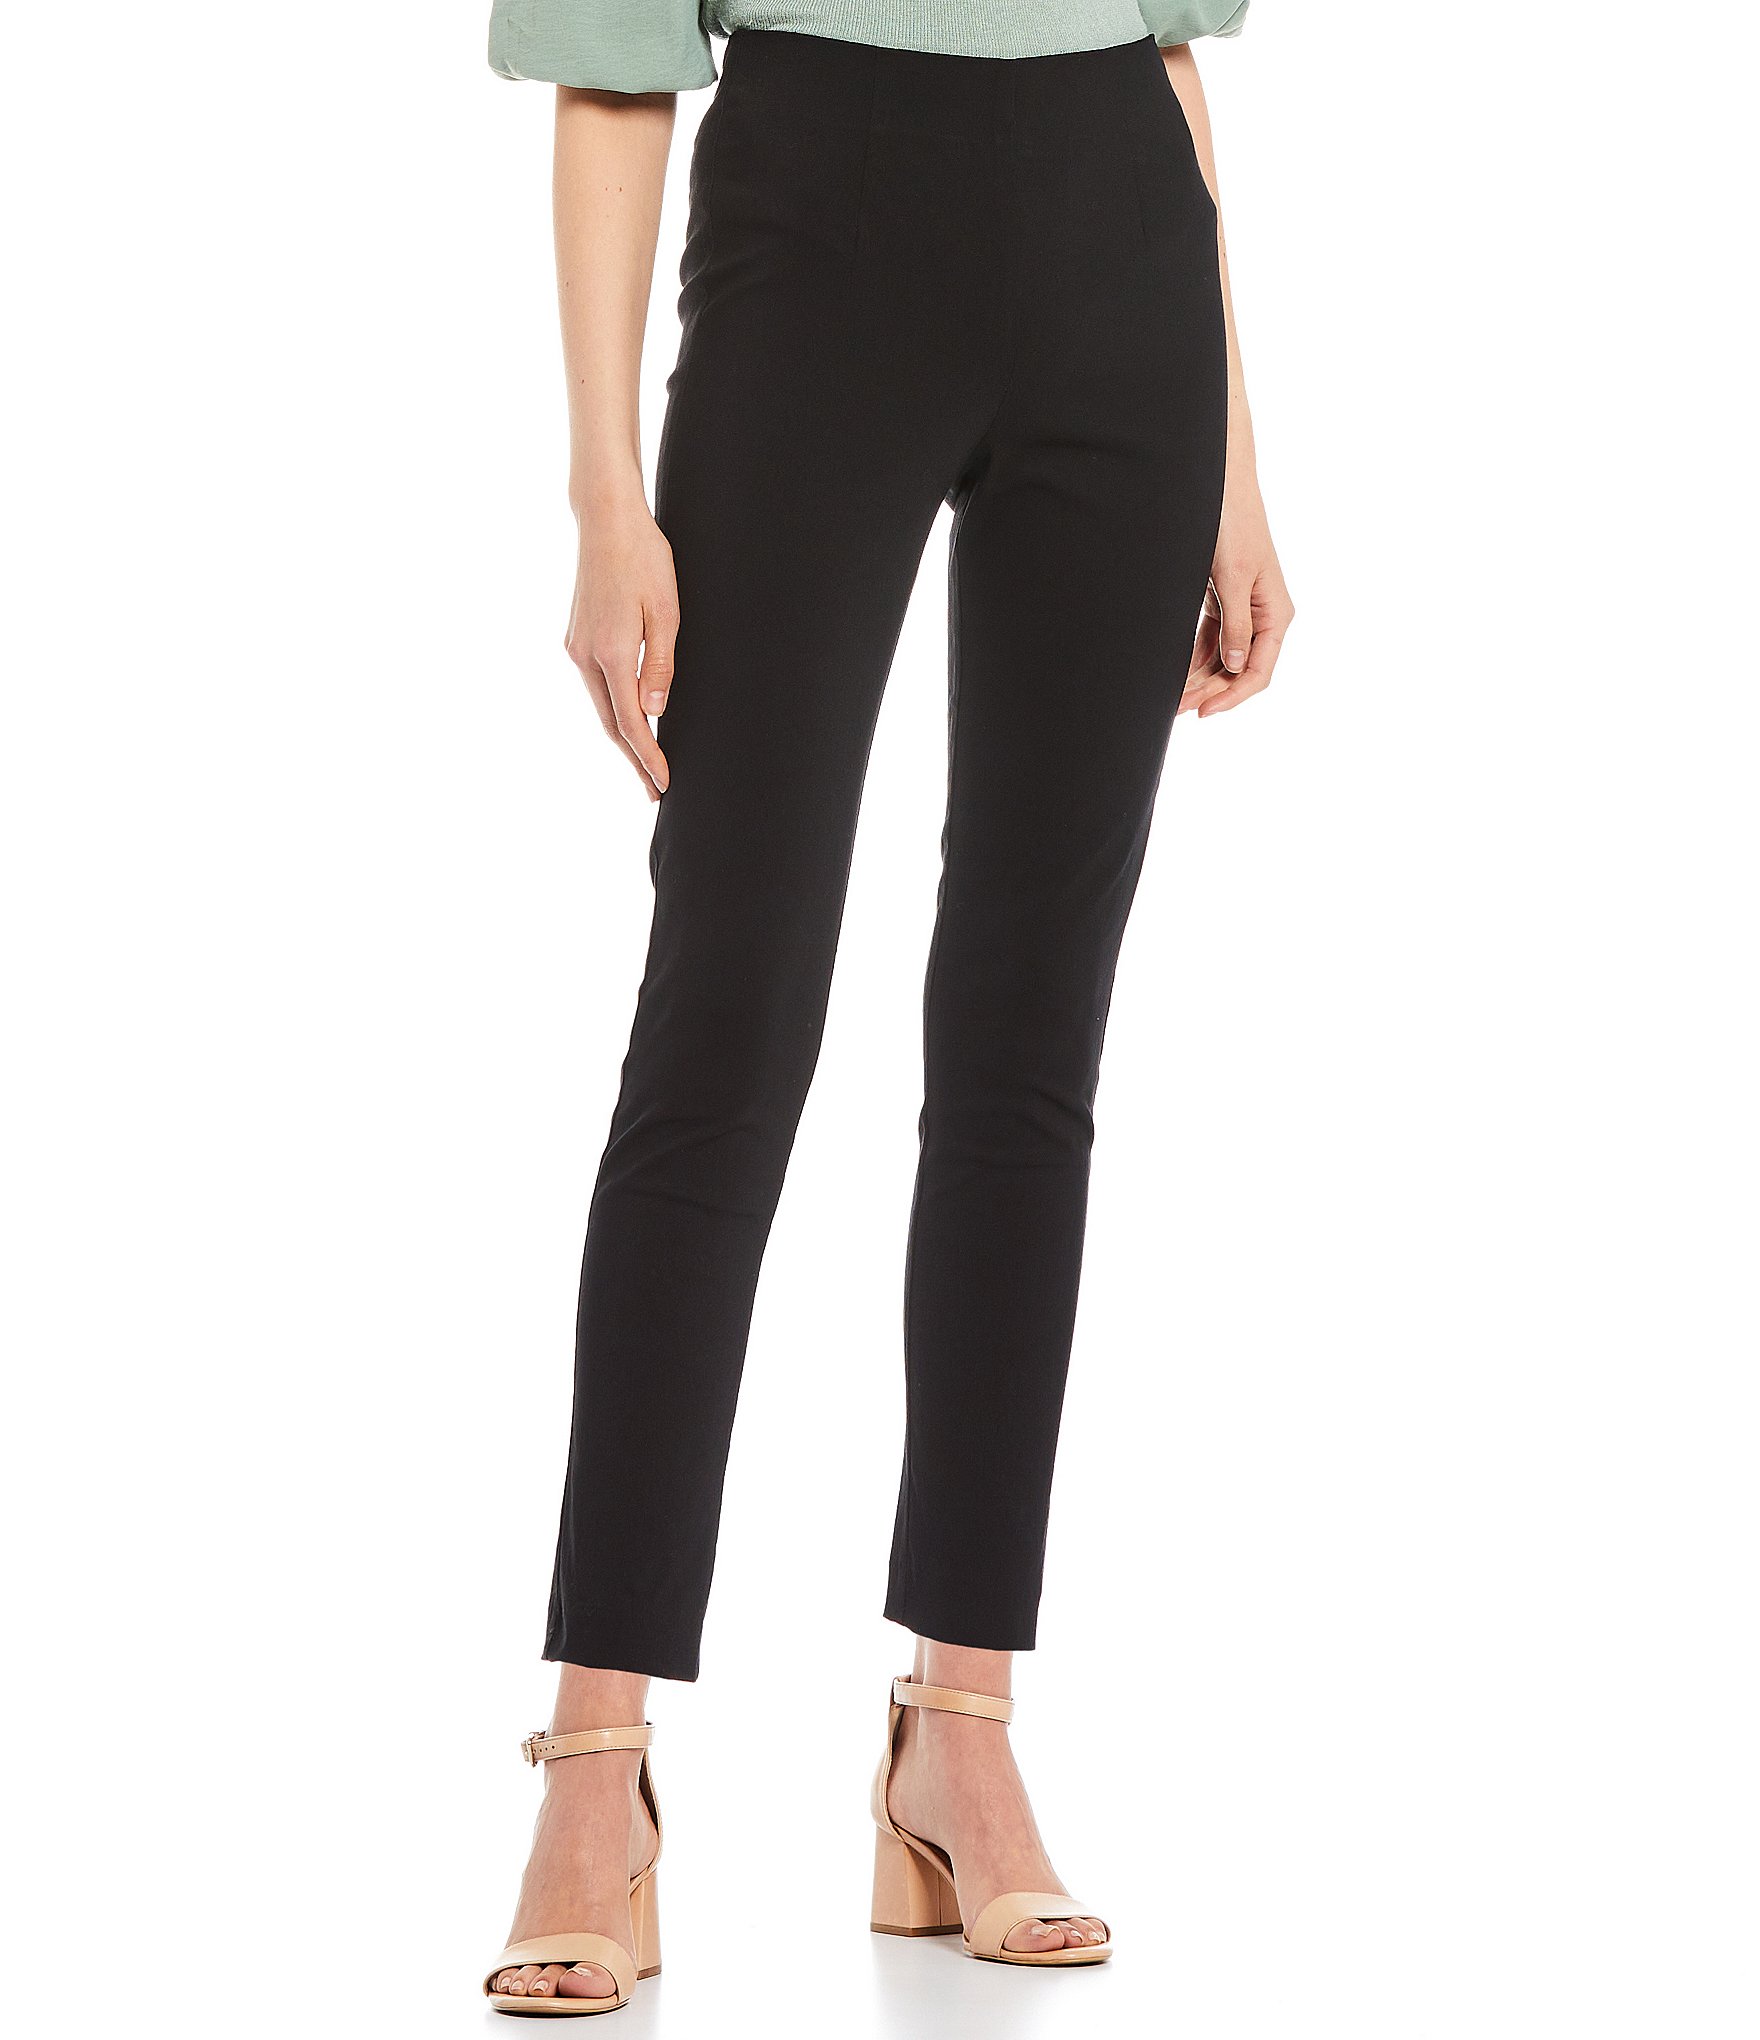 Takara High-Waisted Flat-Front Pull-On Suiting Skinny Pants | Dillard's